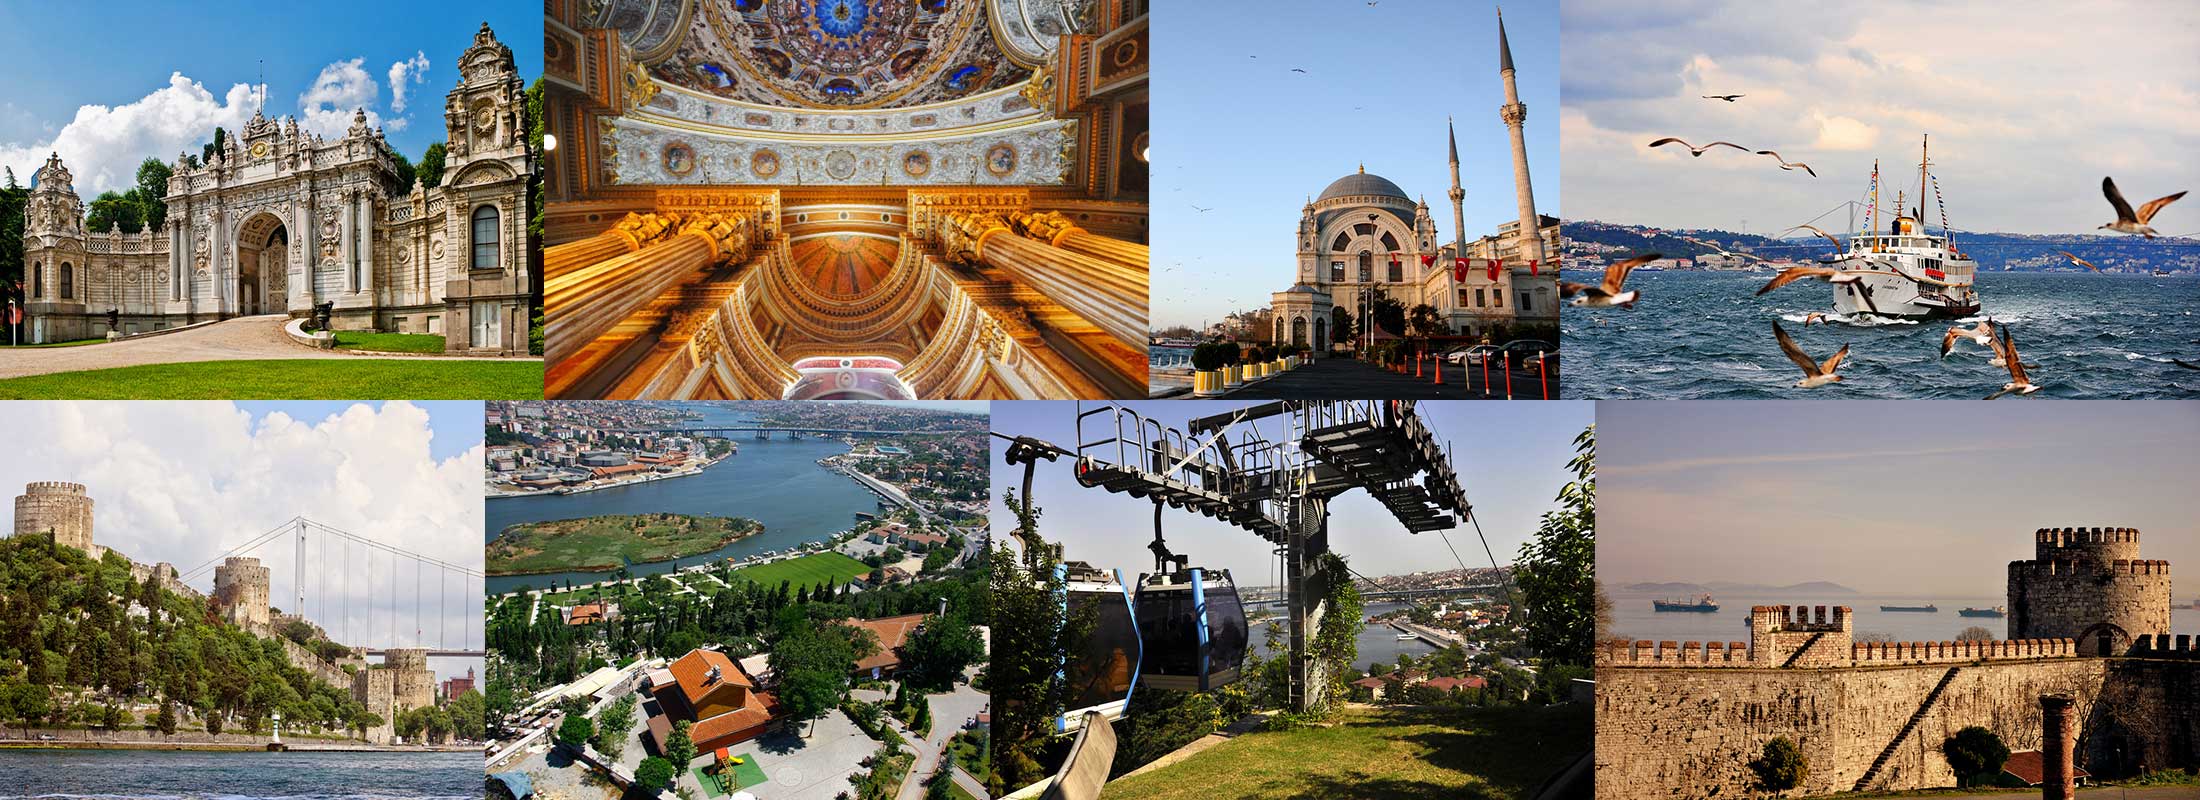 dolmabahce-palace-mosque-pierre-loti-hill-istanbul-daily-city-tour